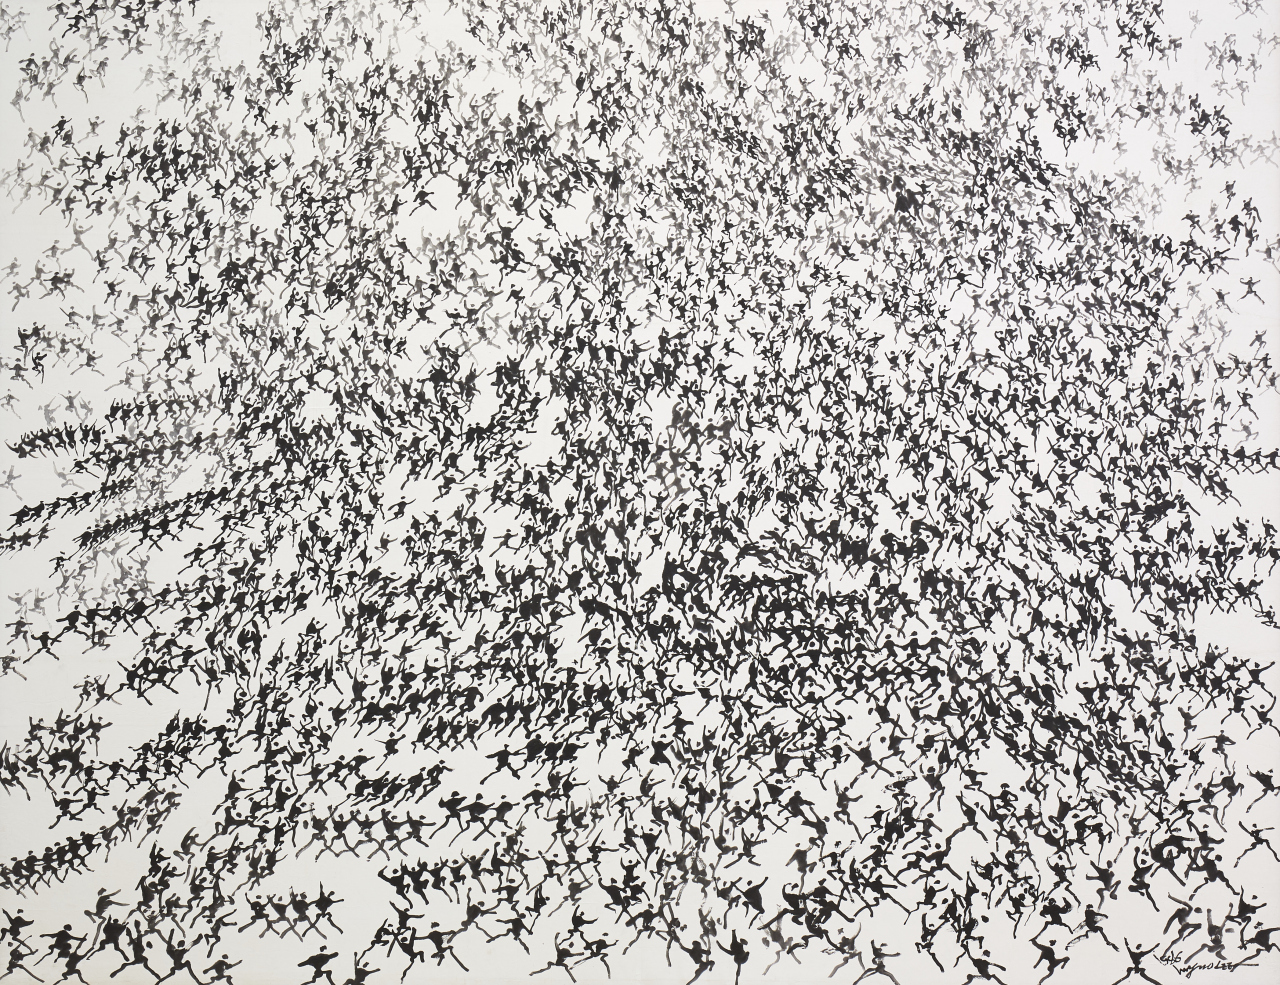 Lee Ung-no’s 1986 painting from his “People” series, at the MMCA Gwacheon branch (MMCA)